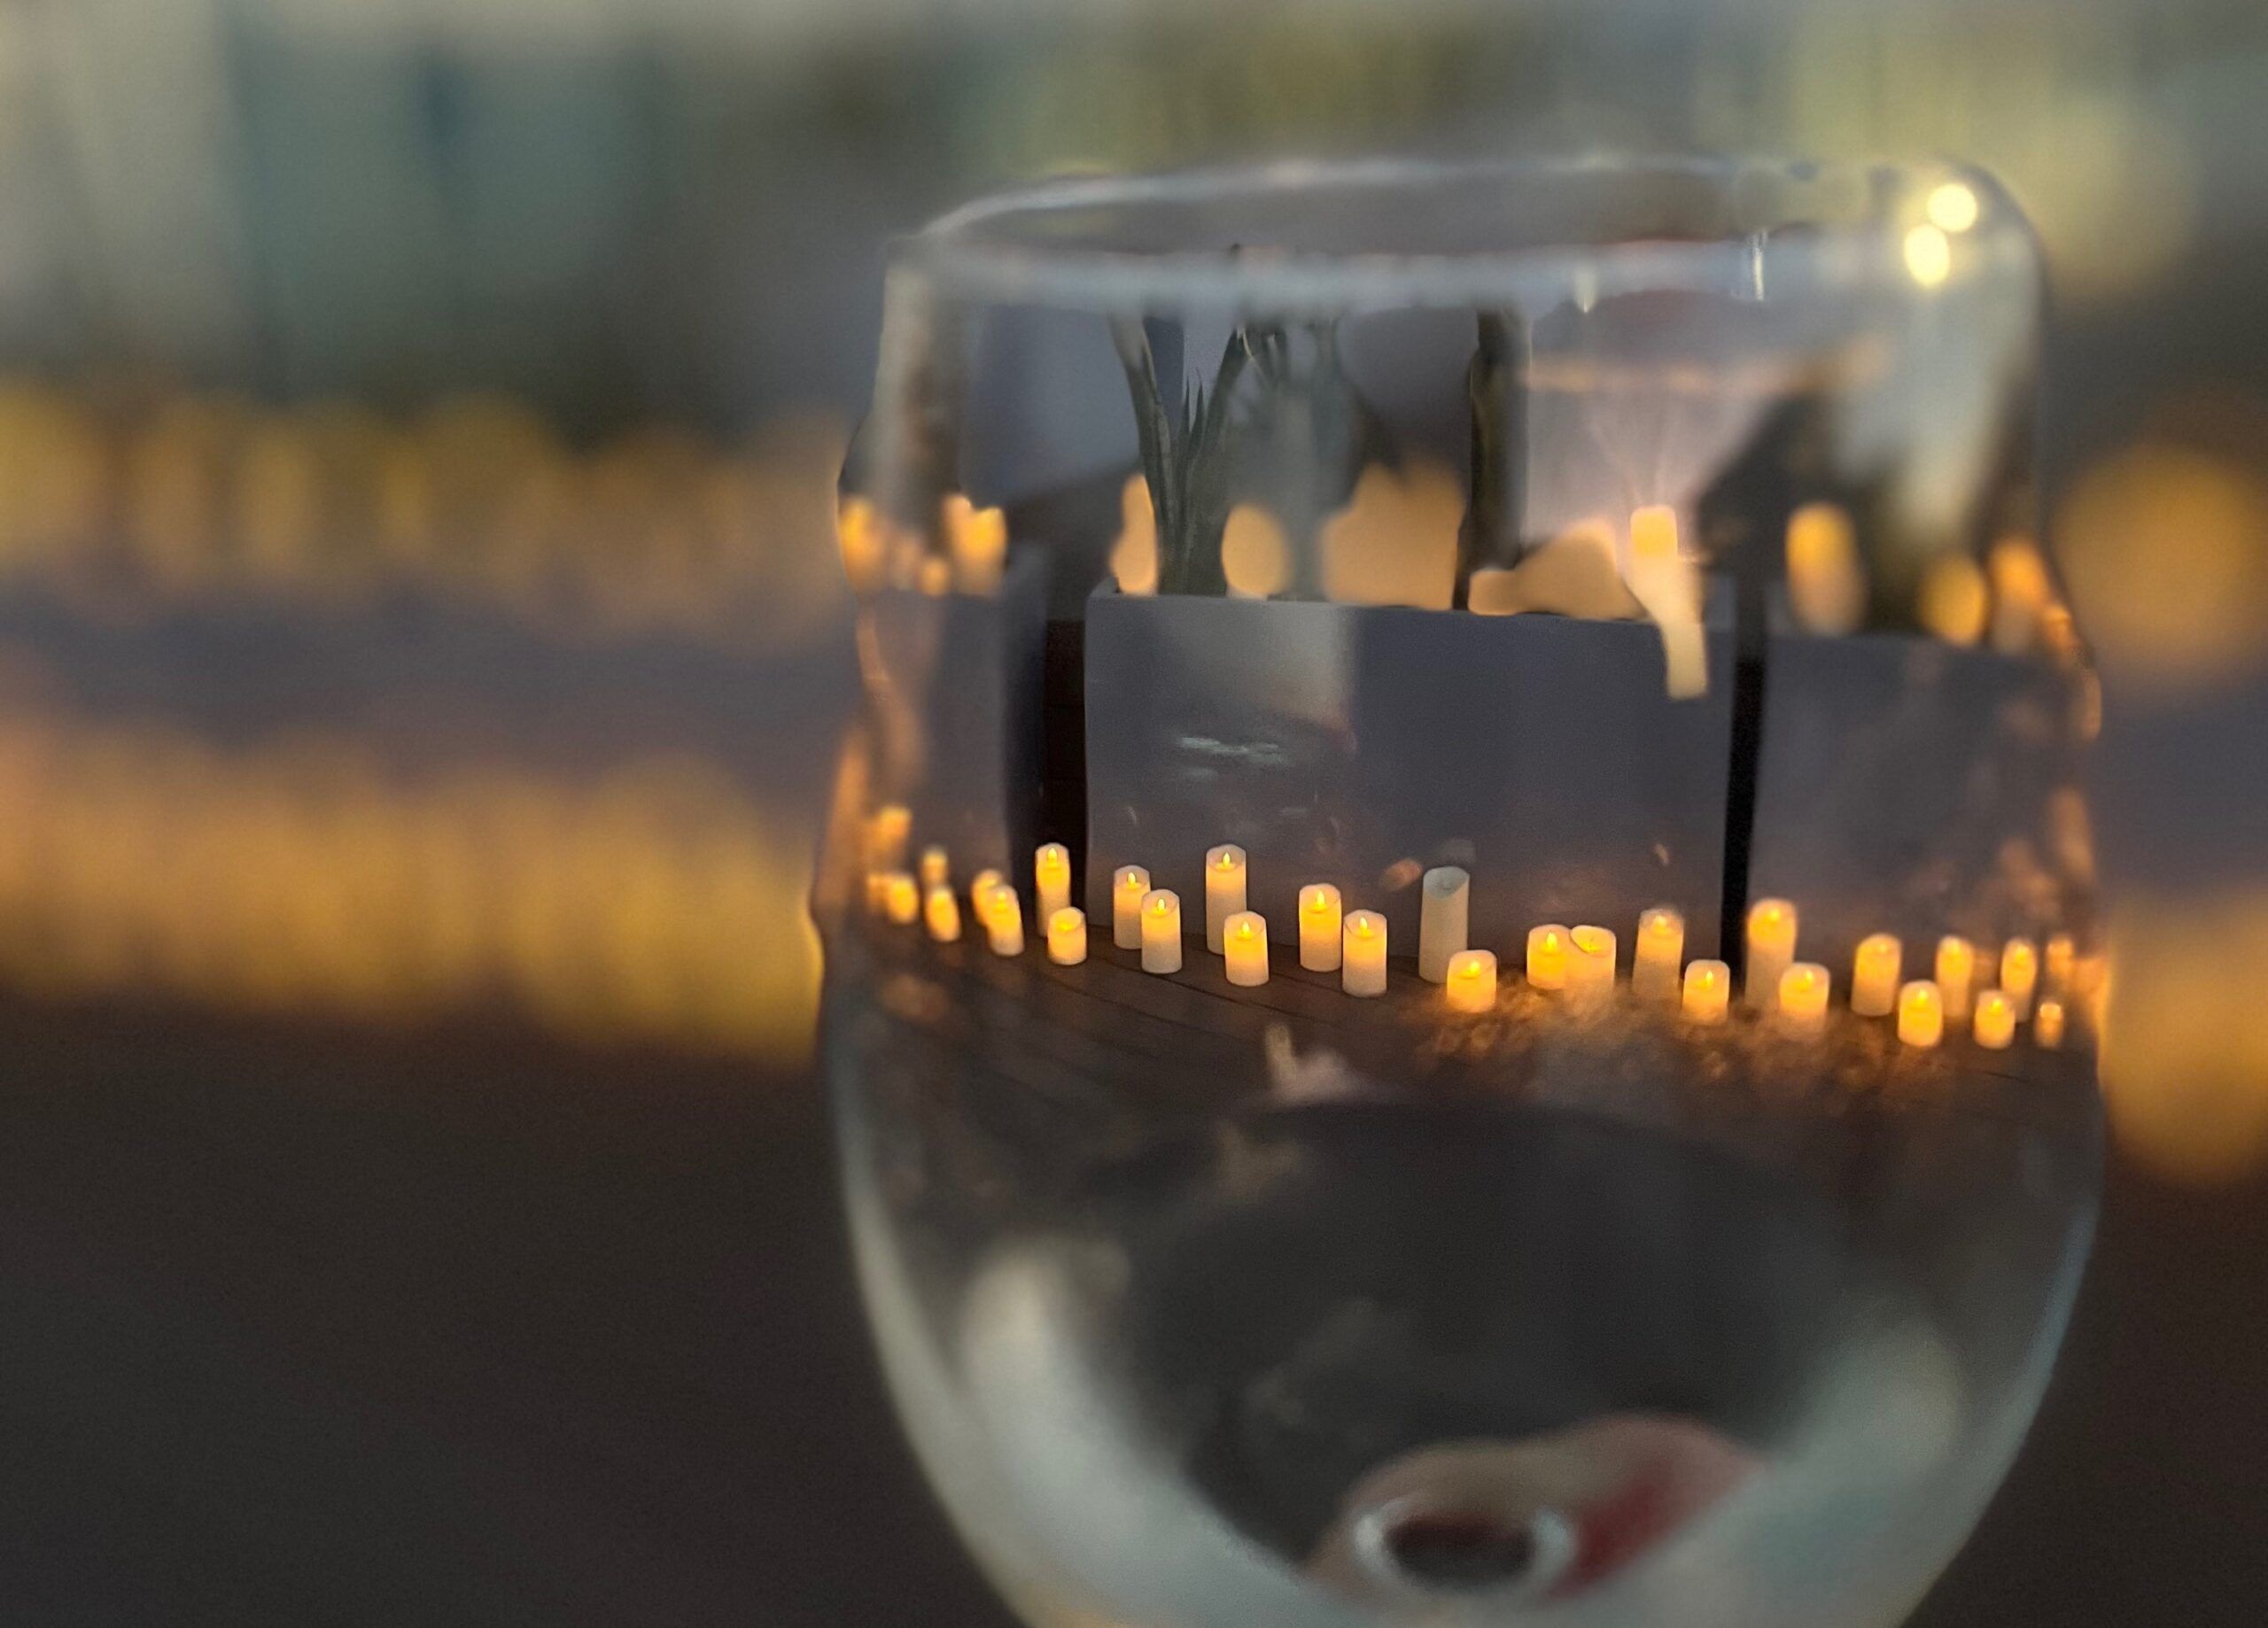 Wine glass showing candles through it